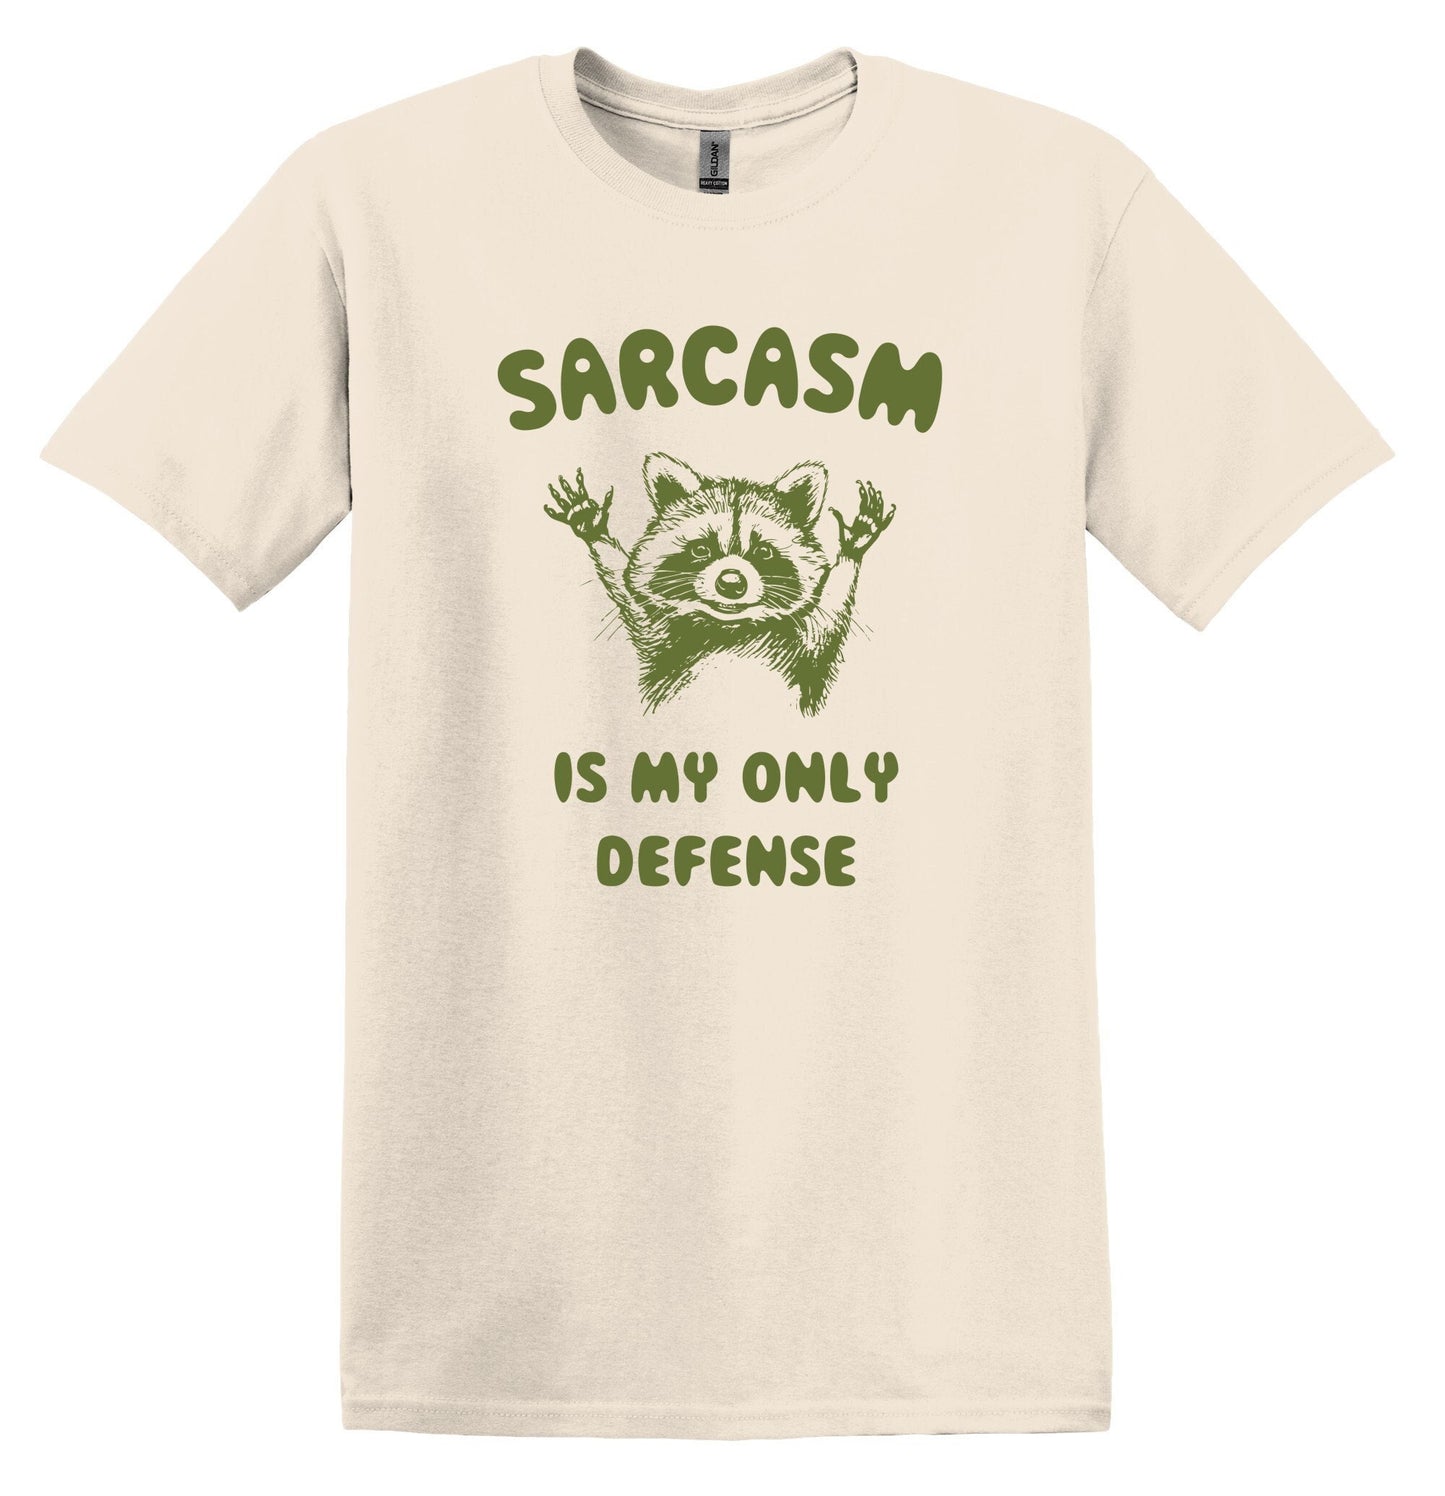 Sarcasm is my only Defense Raccoon T-shirt Graphic Shirt Funny Adult TShirt Vintage Funny TShirt Nostalgia T-Shirt Relaxed Cotton T-Shirt